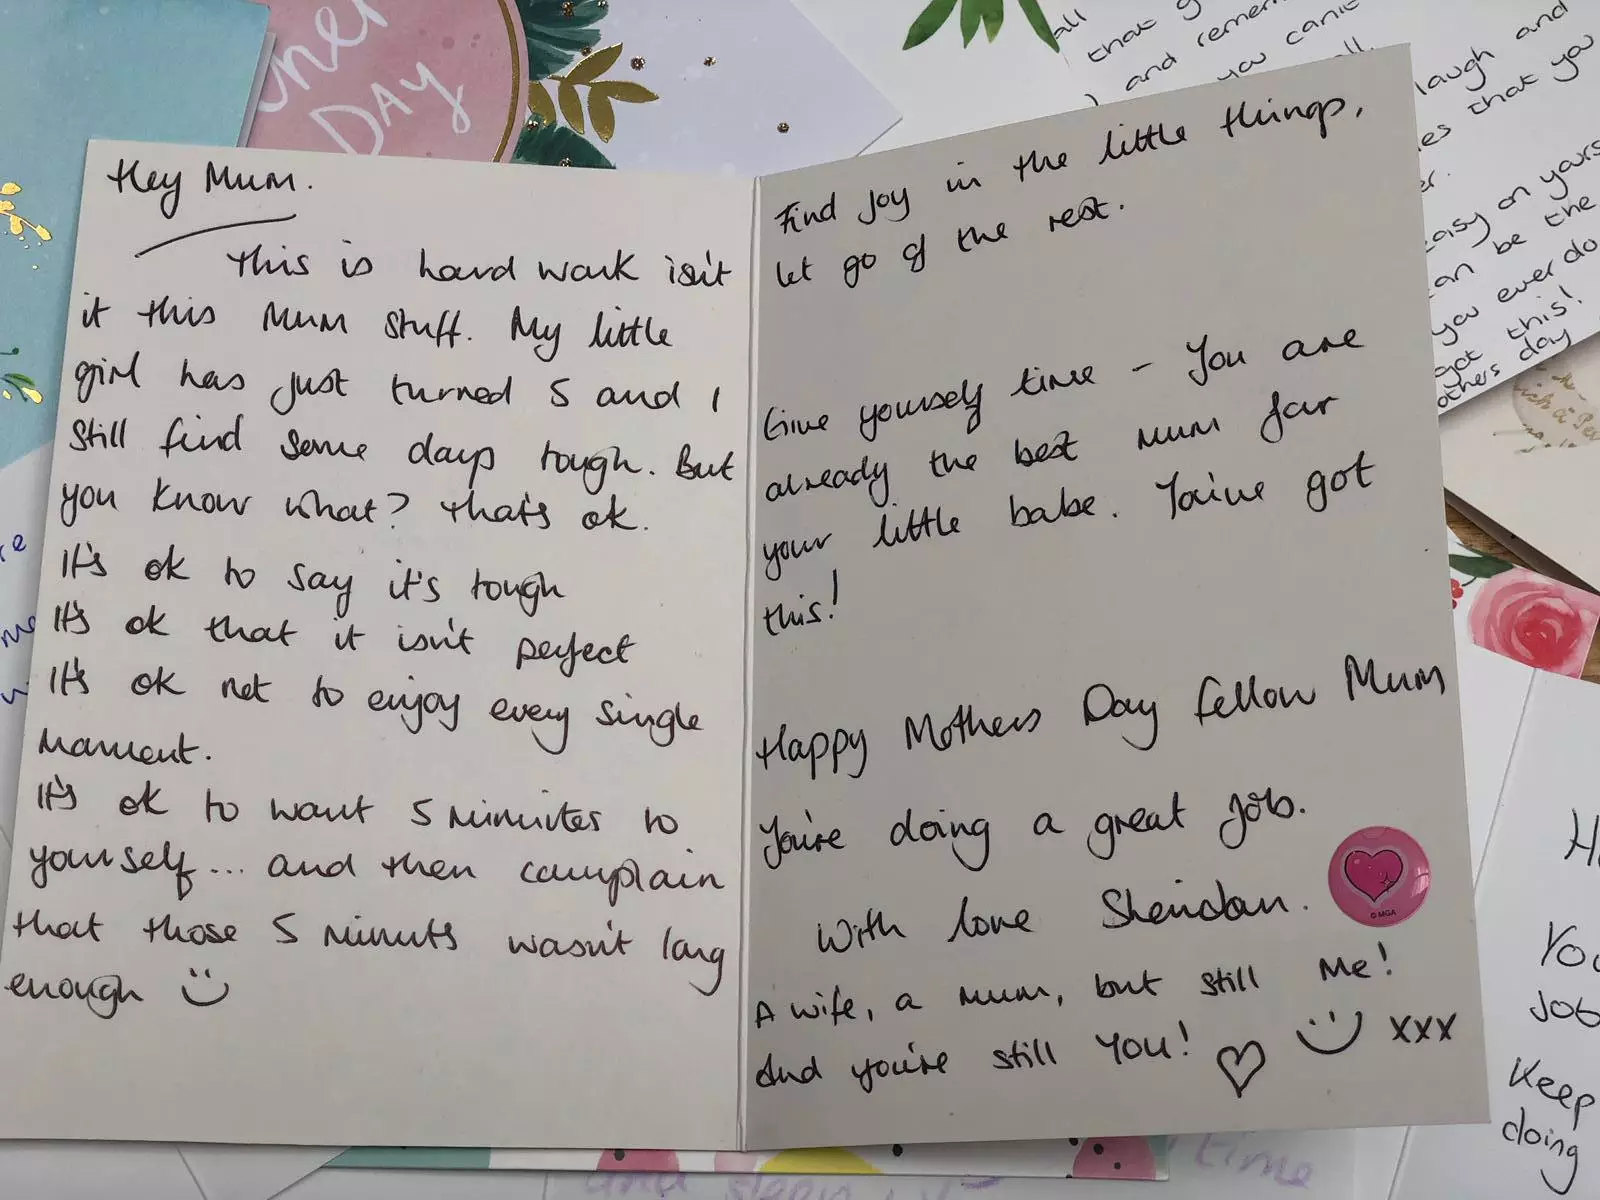 A woman named Sheridan left some lovely words for the new mum who receives her letter (